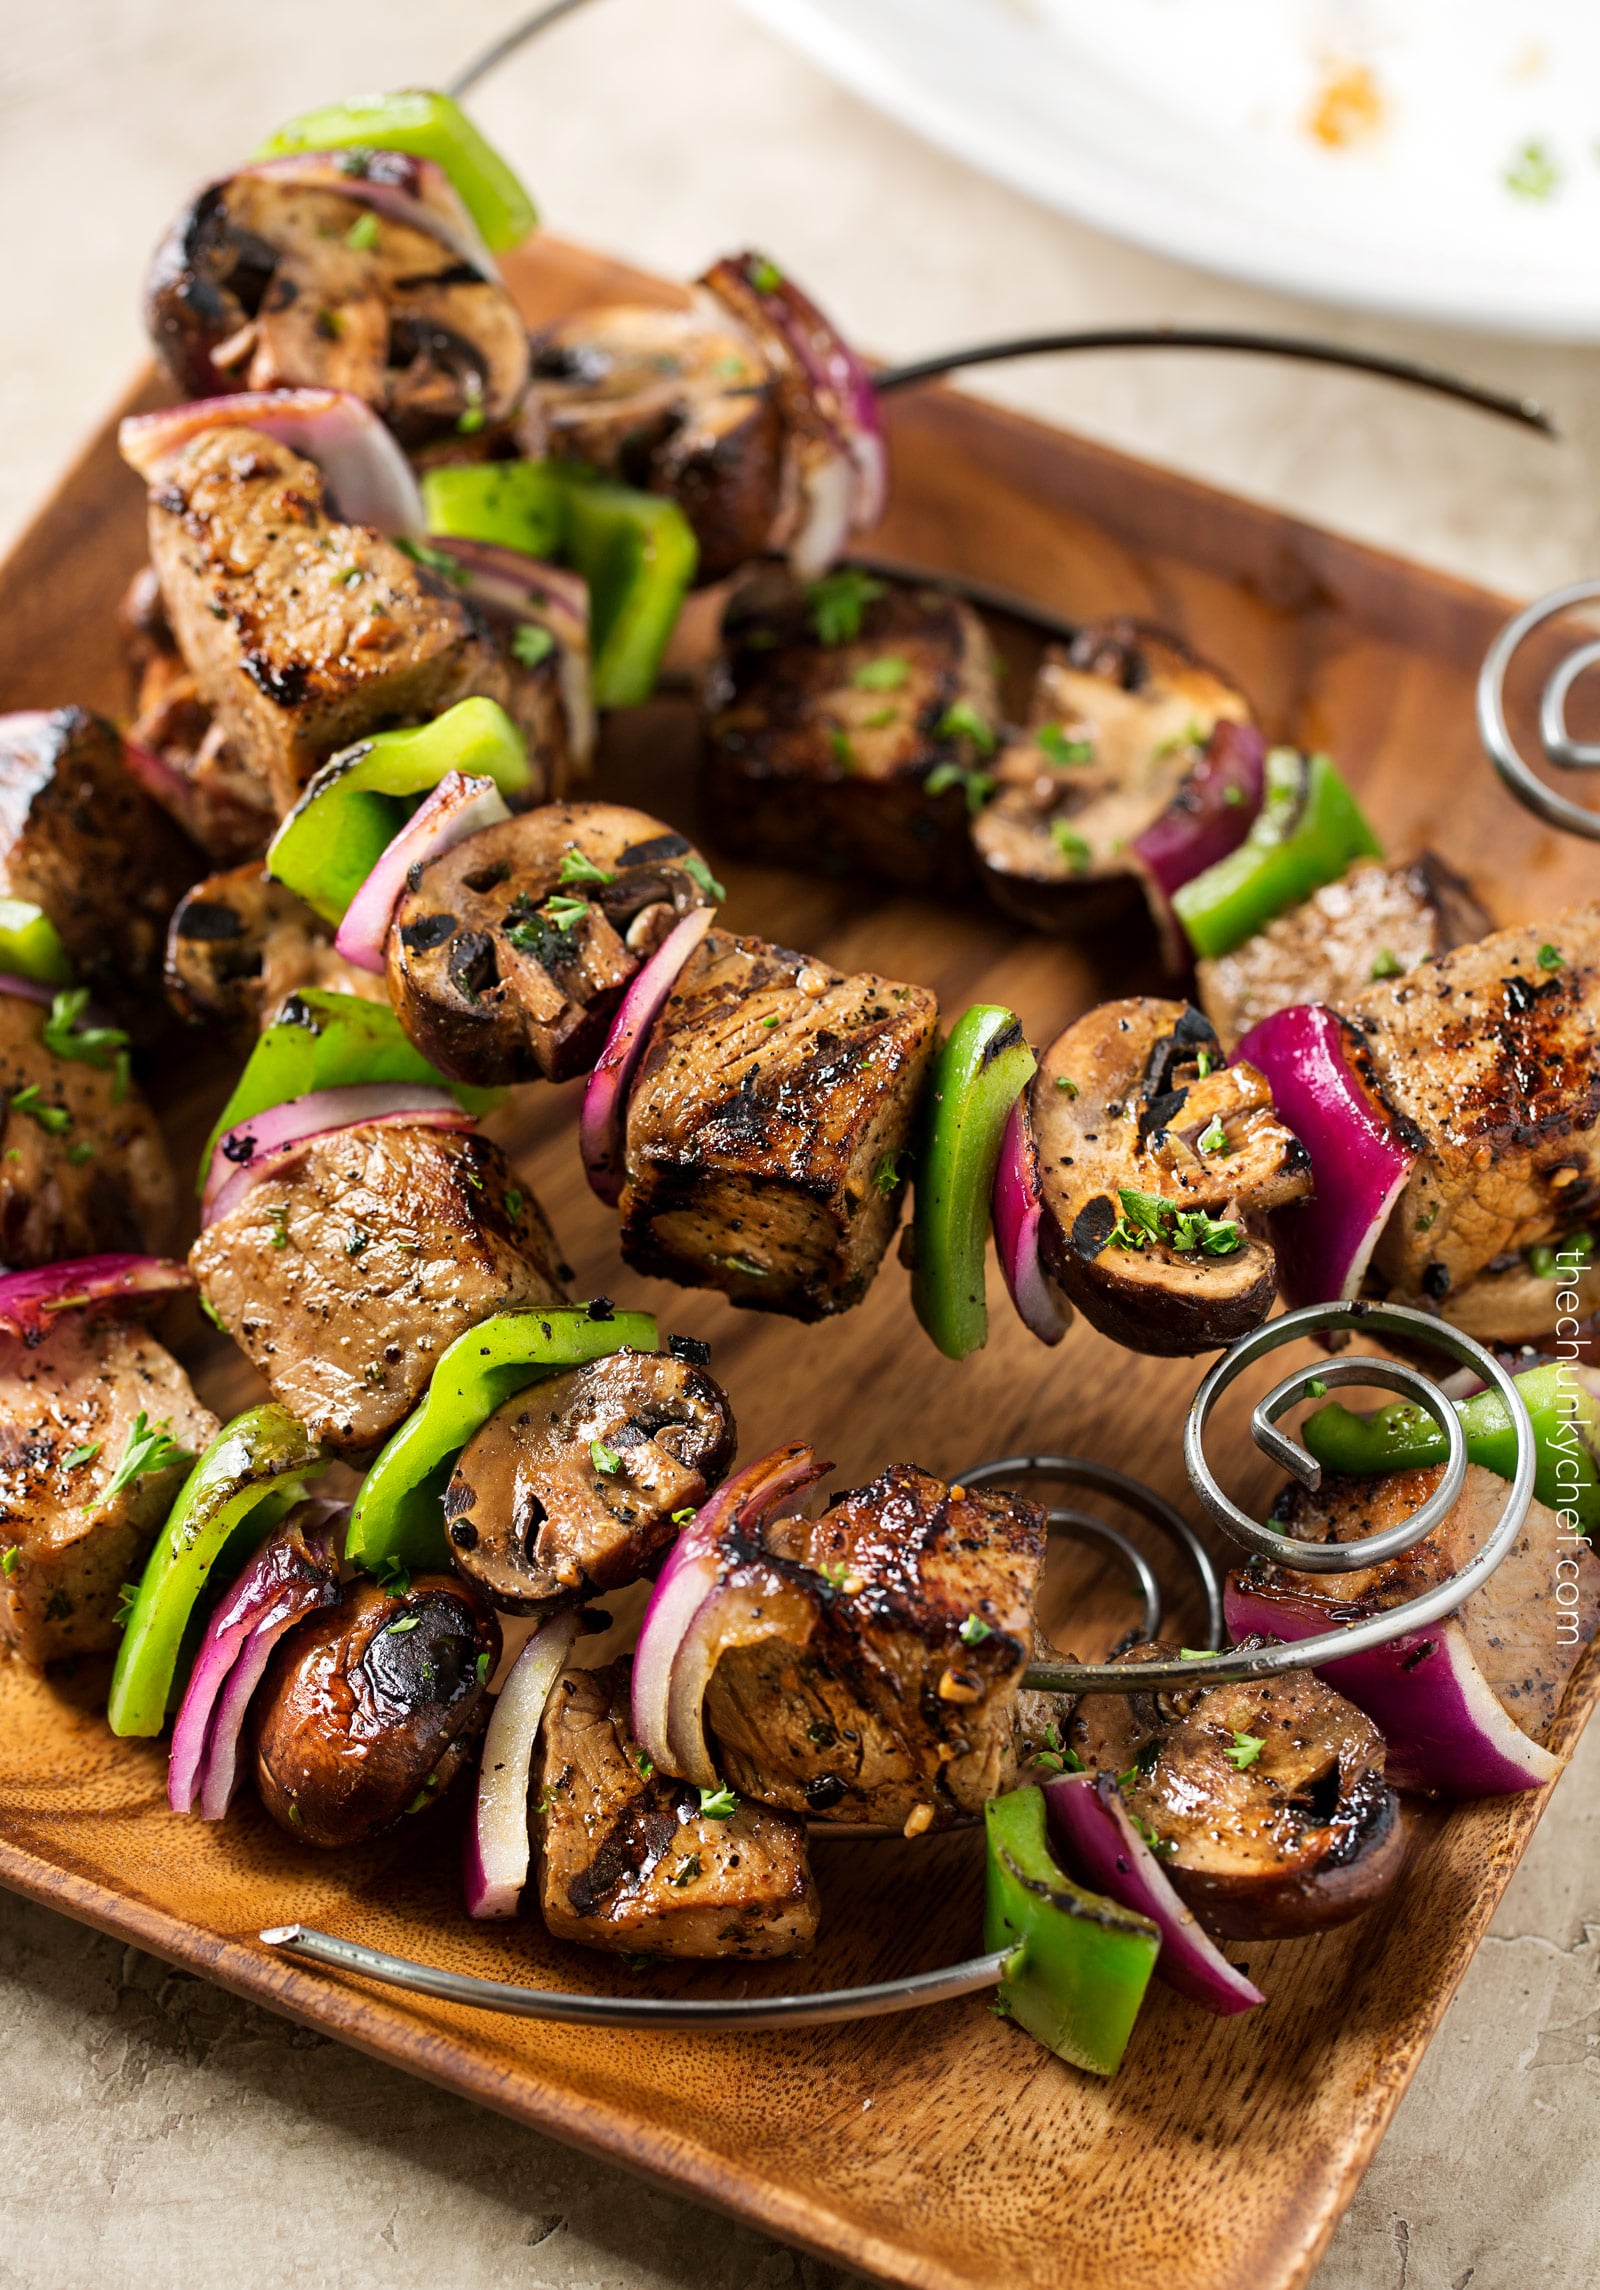 Easy Grilled Steakhouse Kebabs | Bite-sized steak pieces and mushrooms are marinated in an incredibly easy marinade, then skewered with onions and peppers, and grilled to juicy steakhouse perfection! You need these at your next BBQ! | http://thechunkychef.com